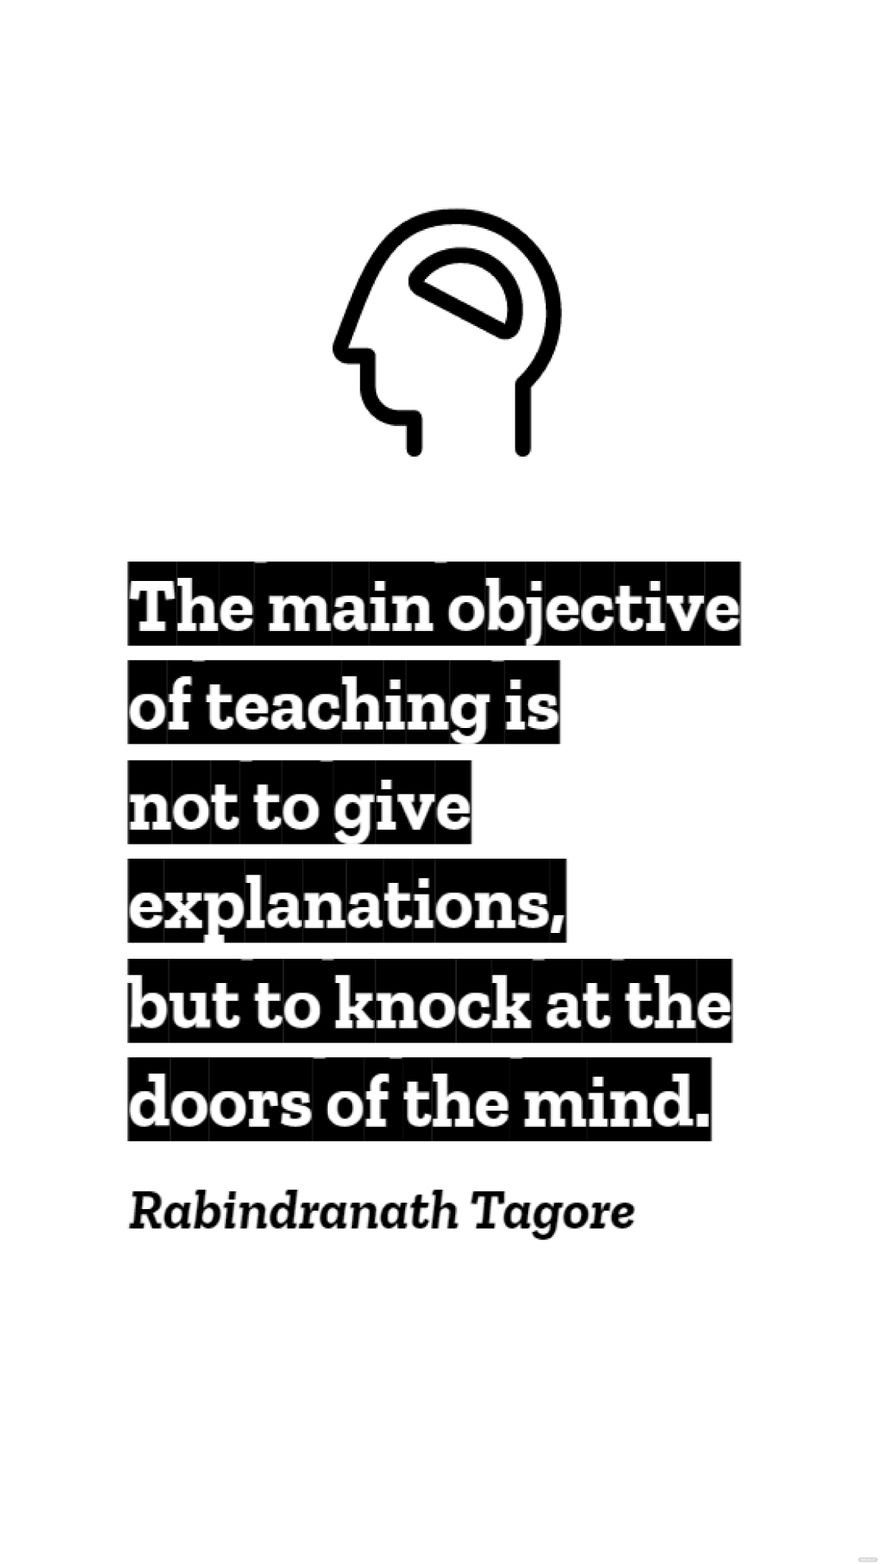 Free Rabindranath Tagore - The main objective of teaching is not to give explanations, but to knock at the doors of the mind. in JPG